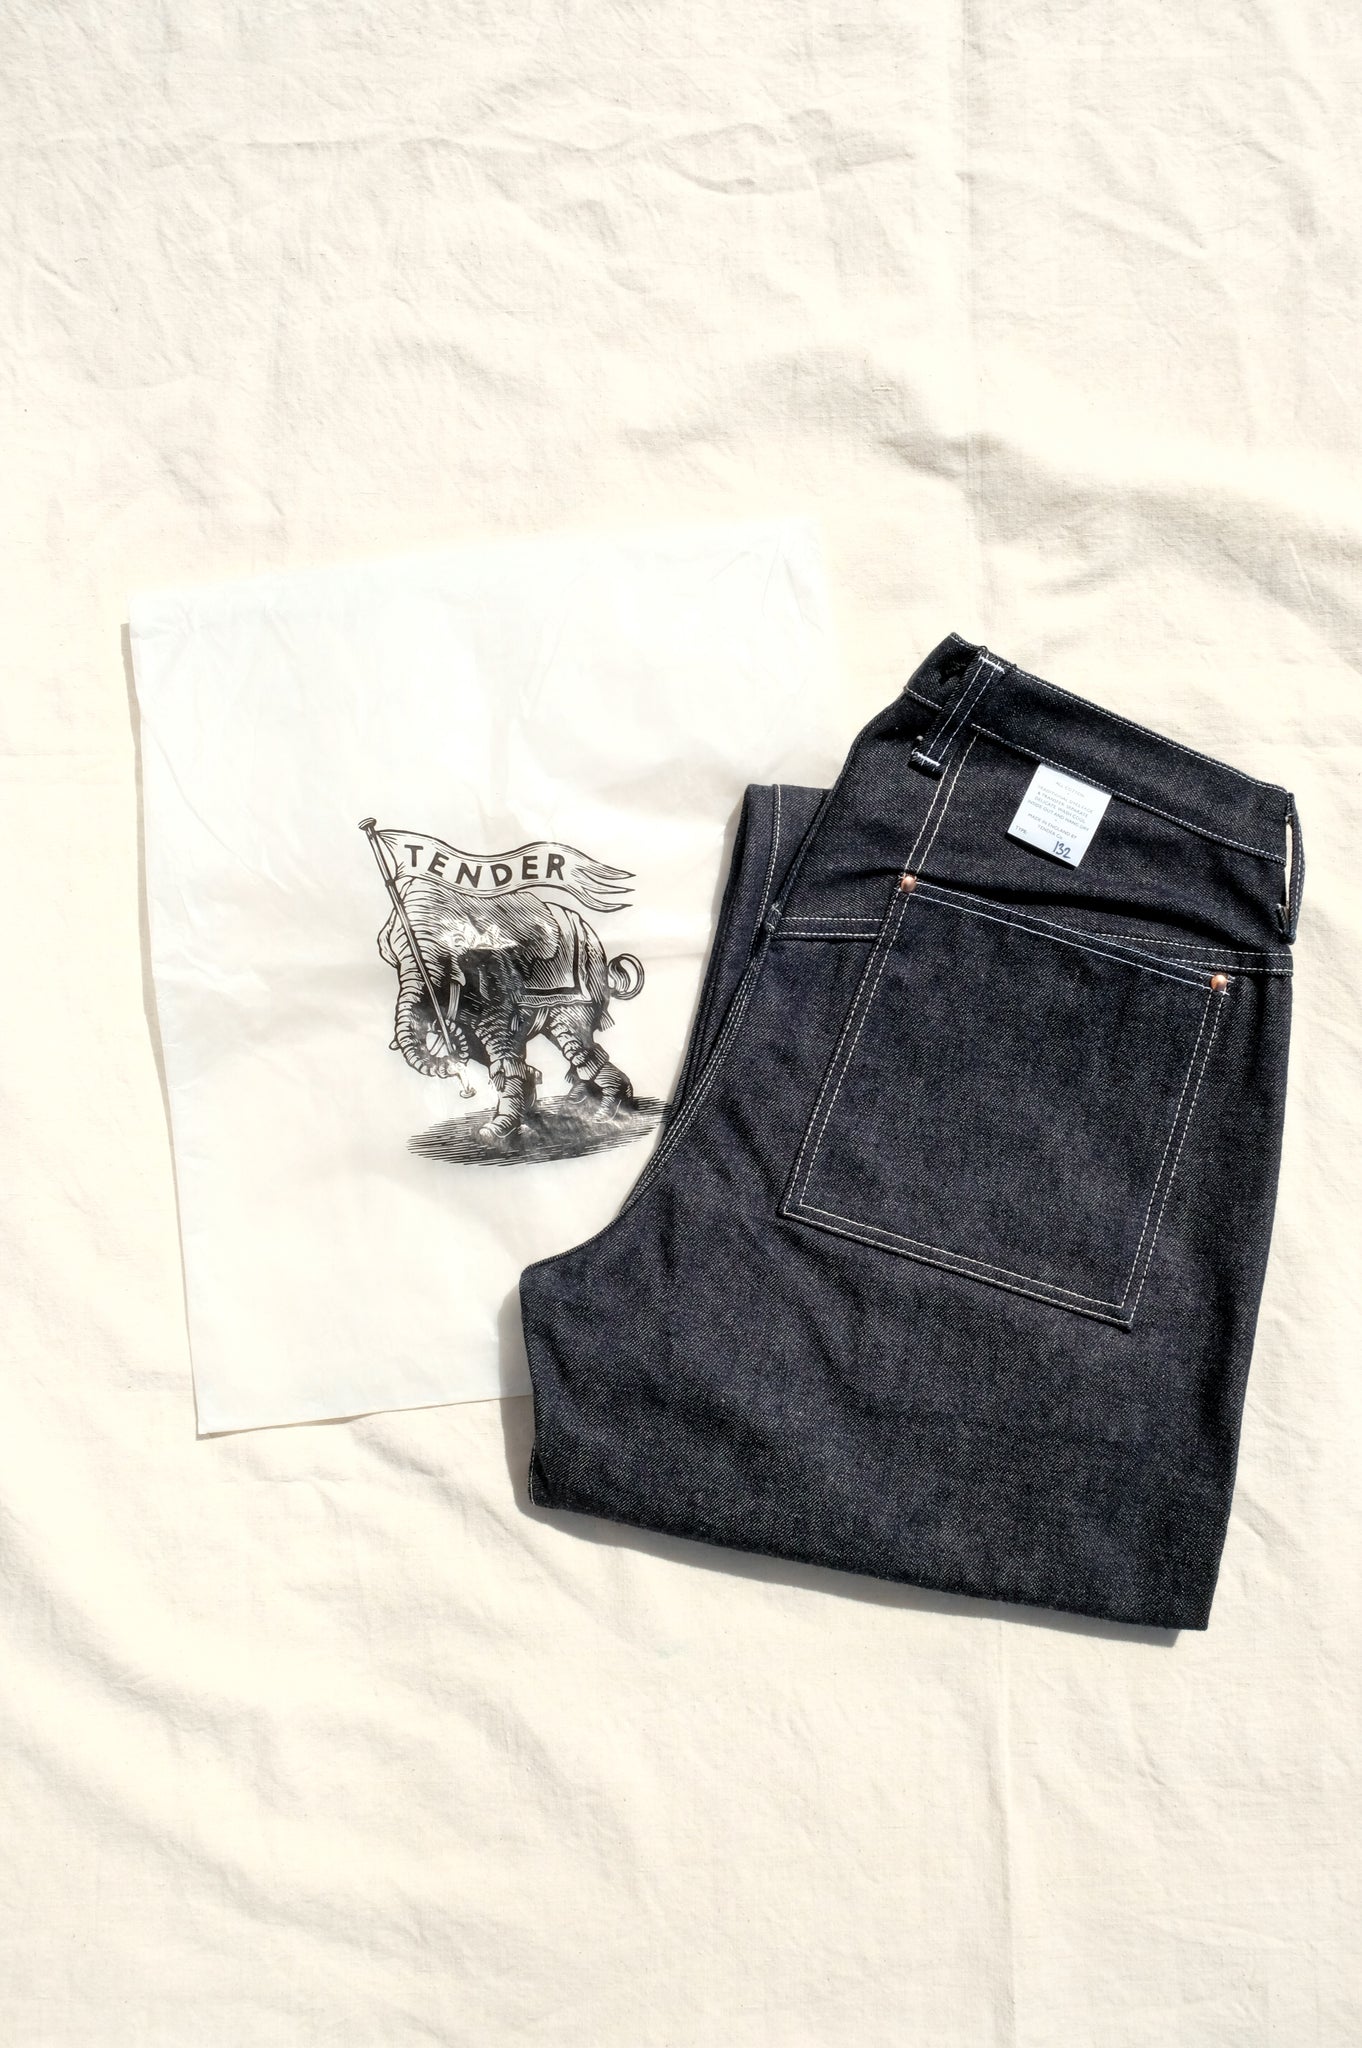 TENDER Co. "TYPE132 WIDE JEANS/RINSE"